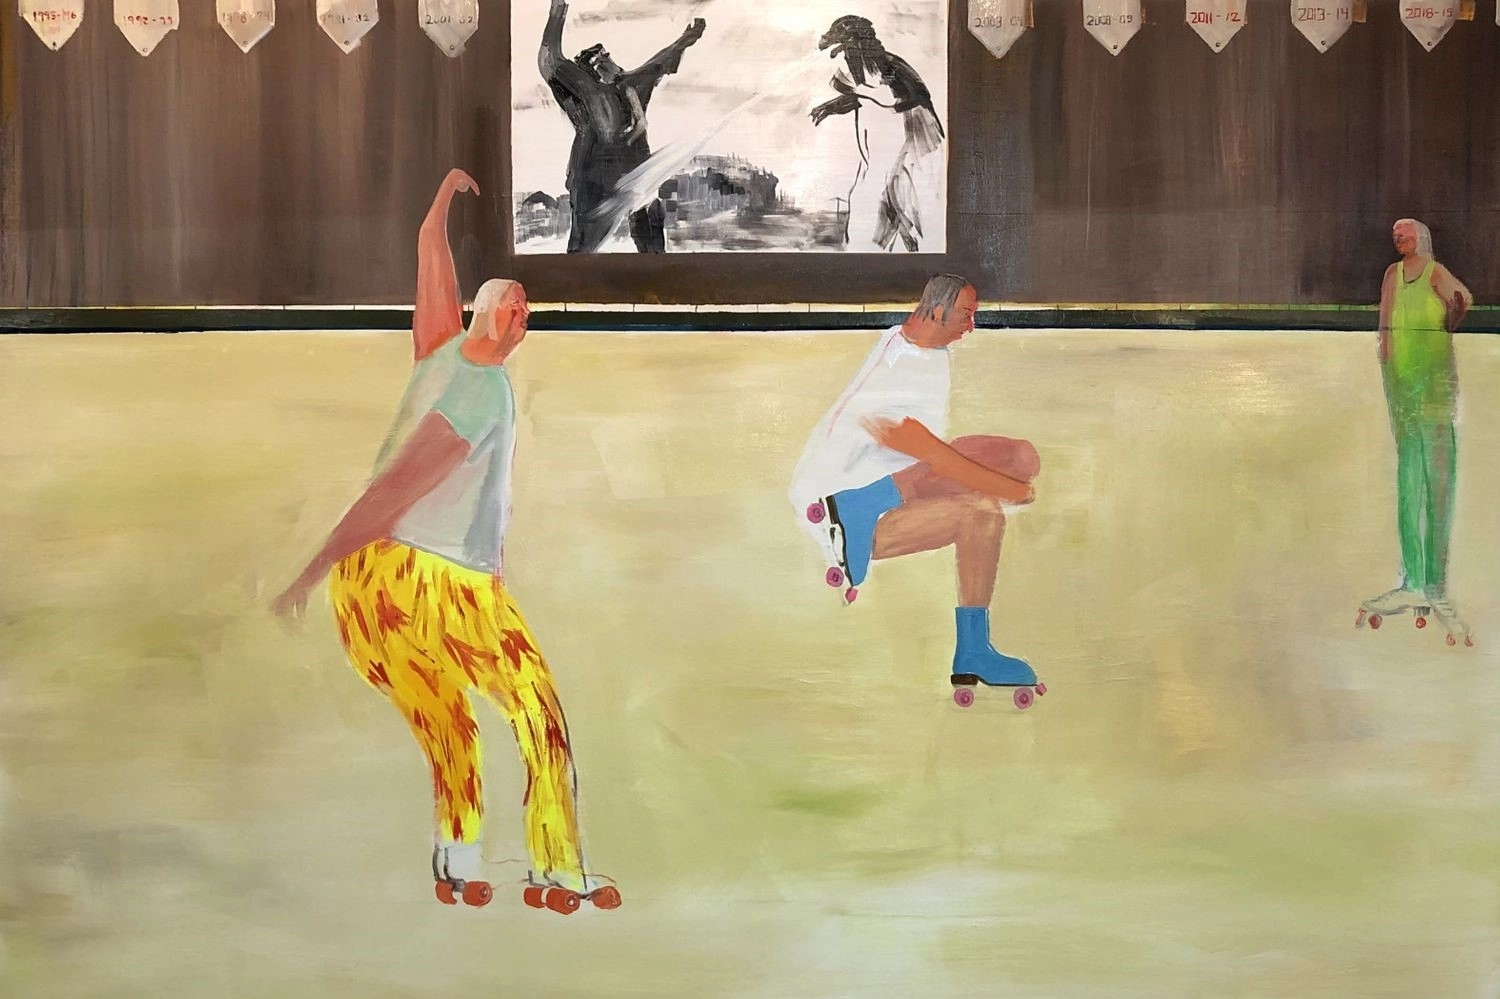 At first glance, it’s just carefree summer exercising. However, Grace Metzler’s paintings hide undeniable dark humour